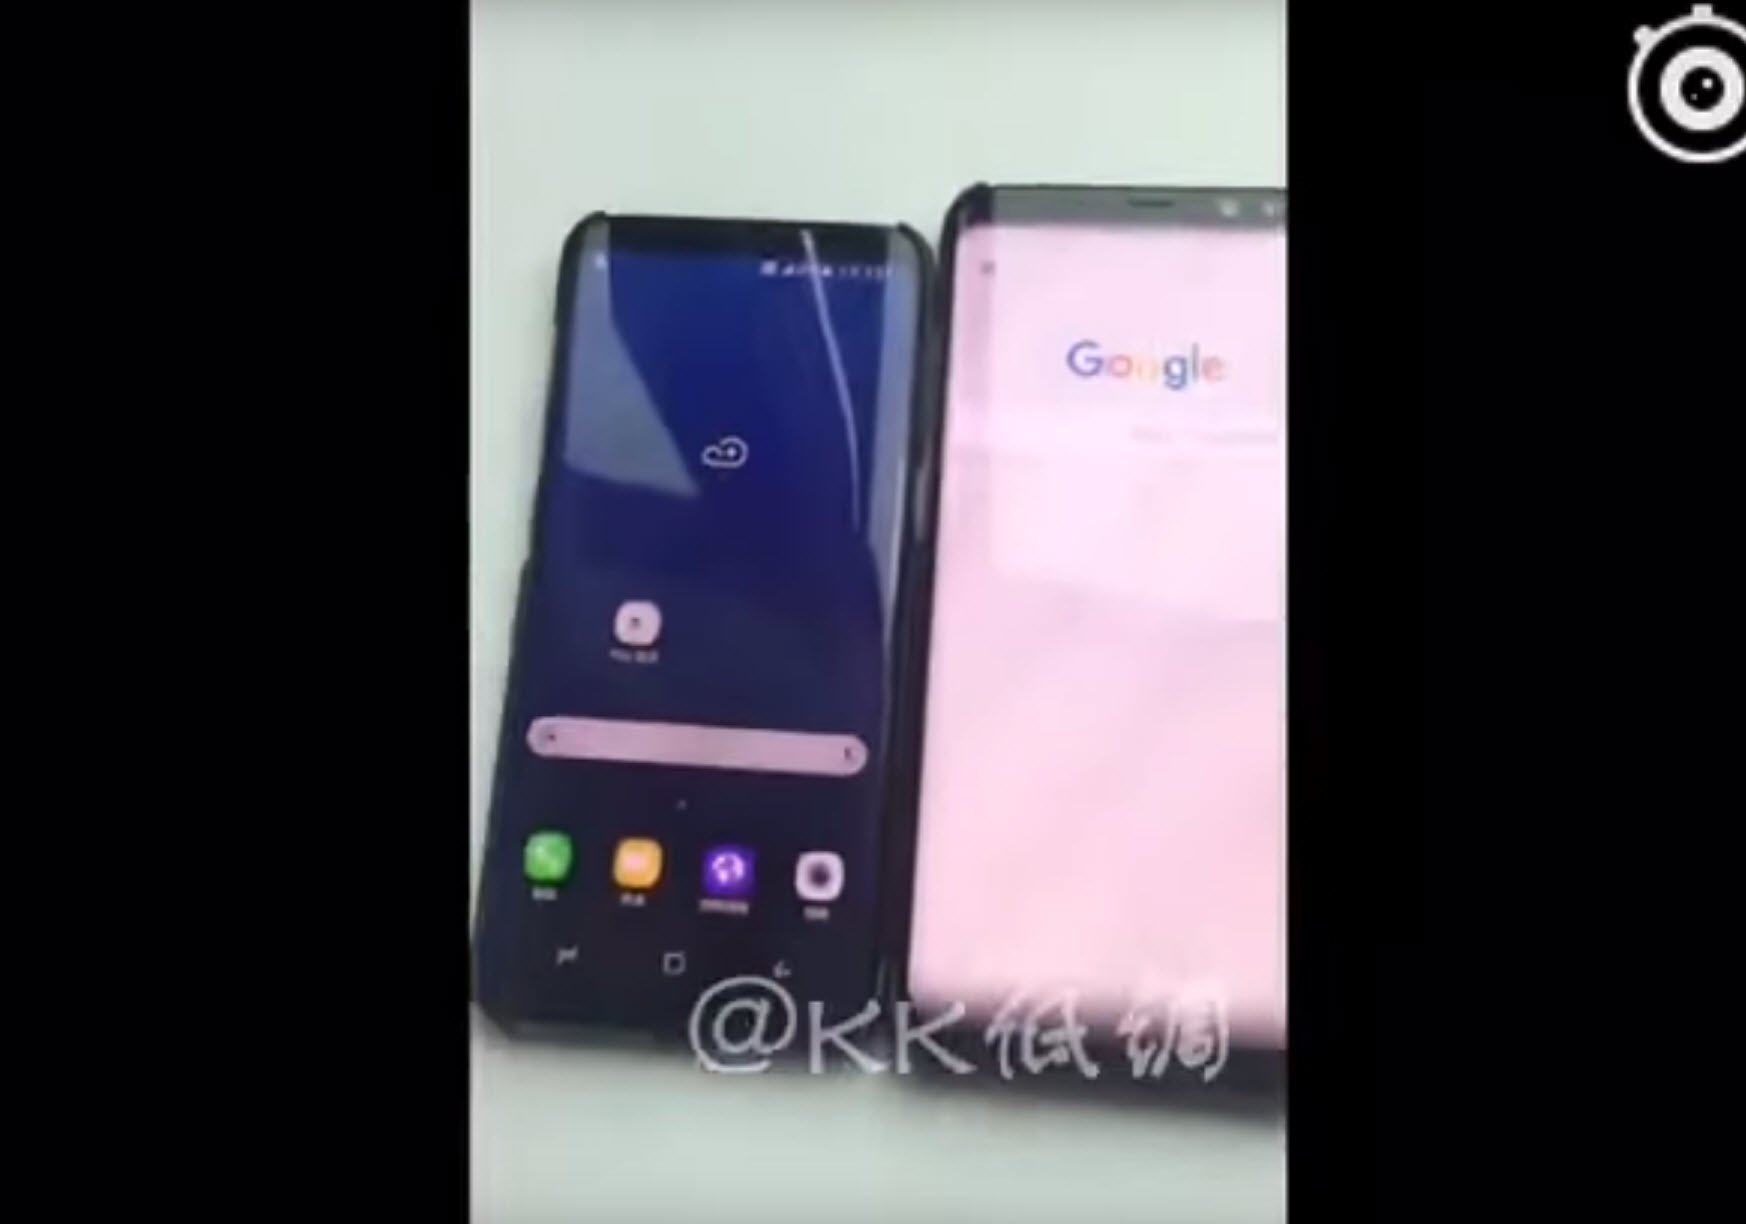 Samsung Galaxy S8, Galaxy S8 Plus Leaked in Hands-On Video